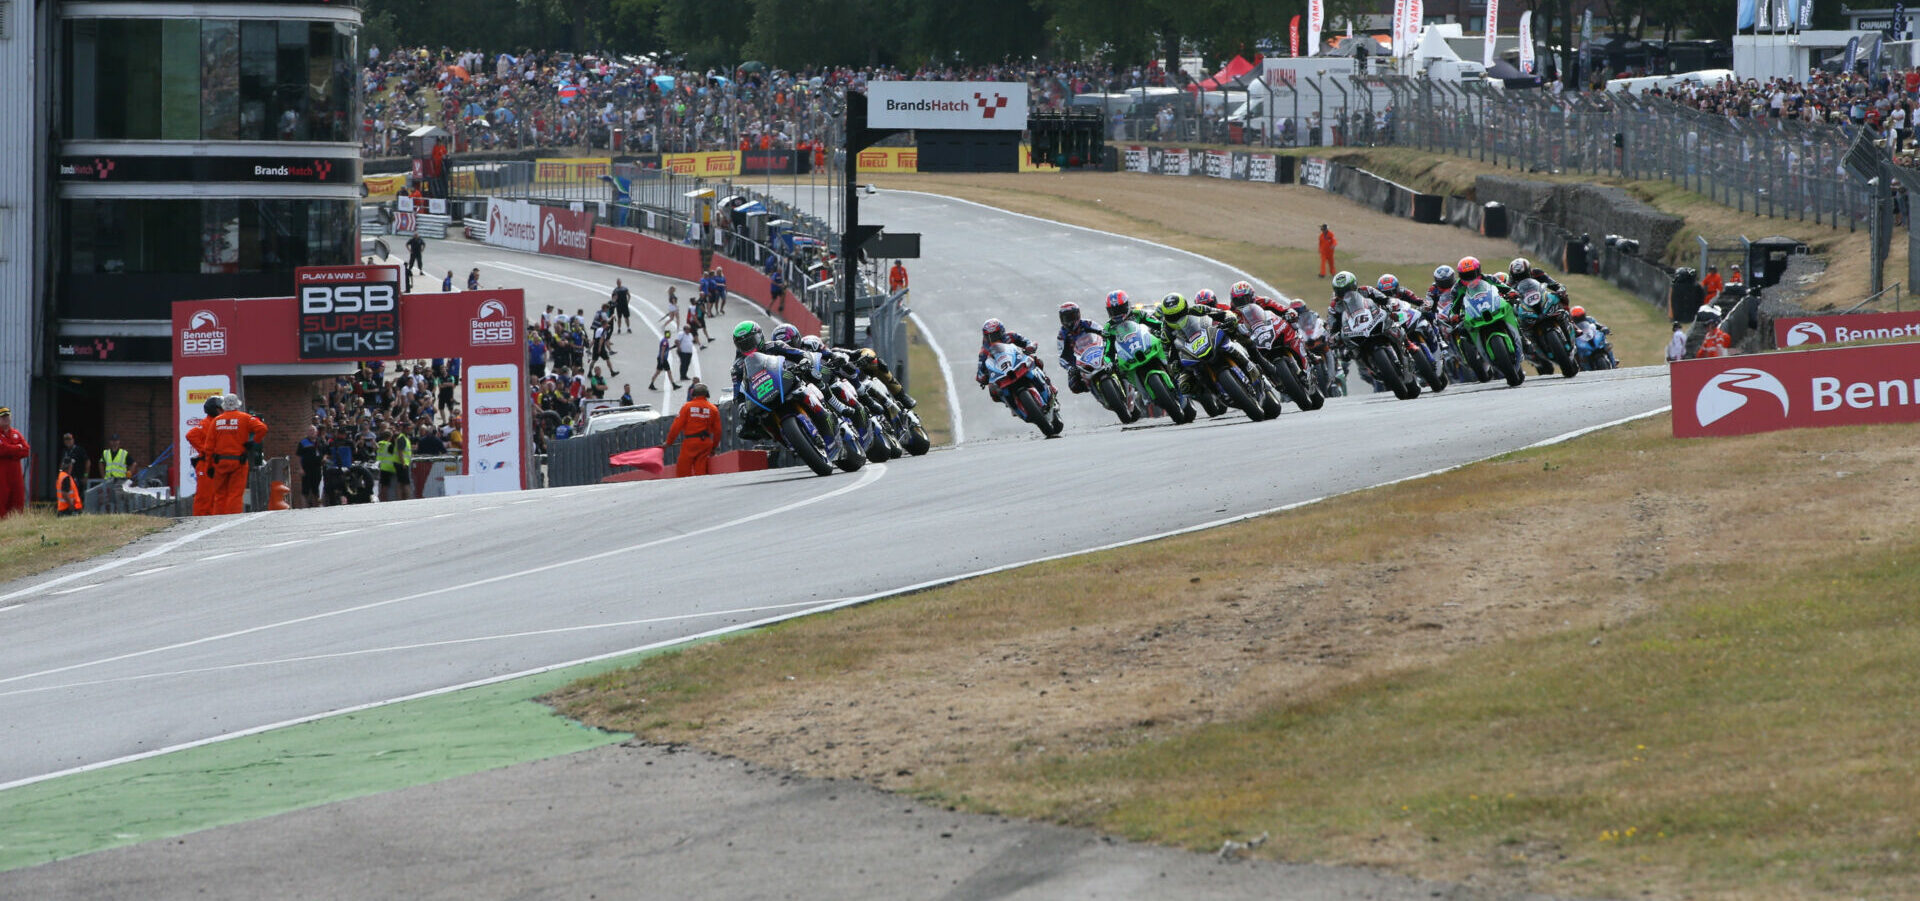 The start of a British Superbike race at Brands Hatch. Photo courtesy MSVR.